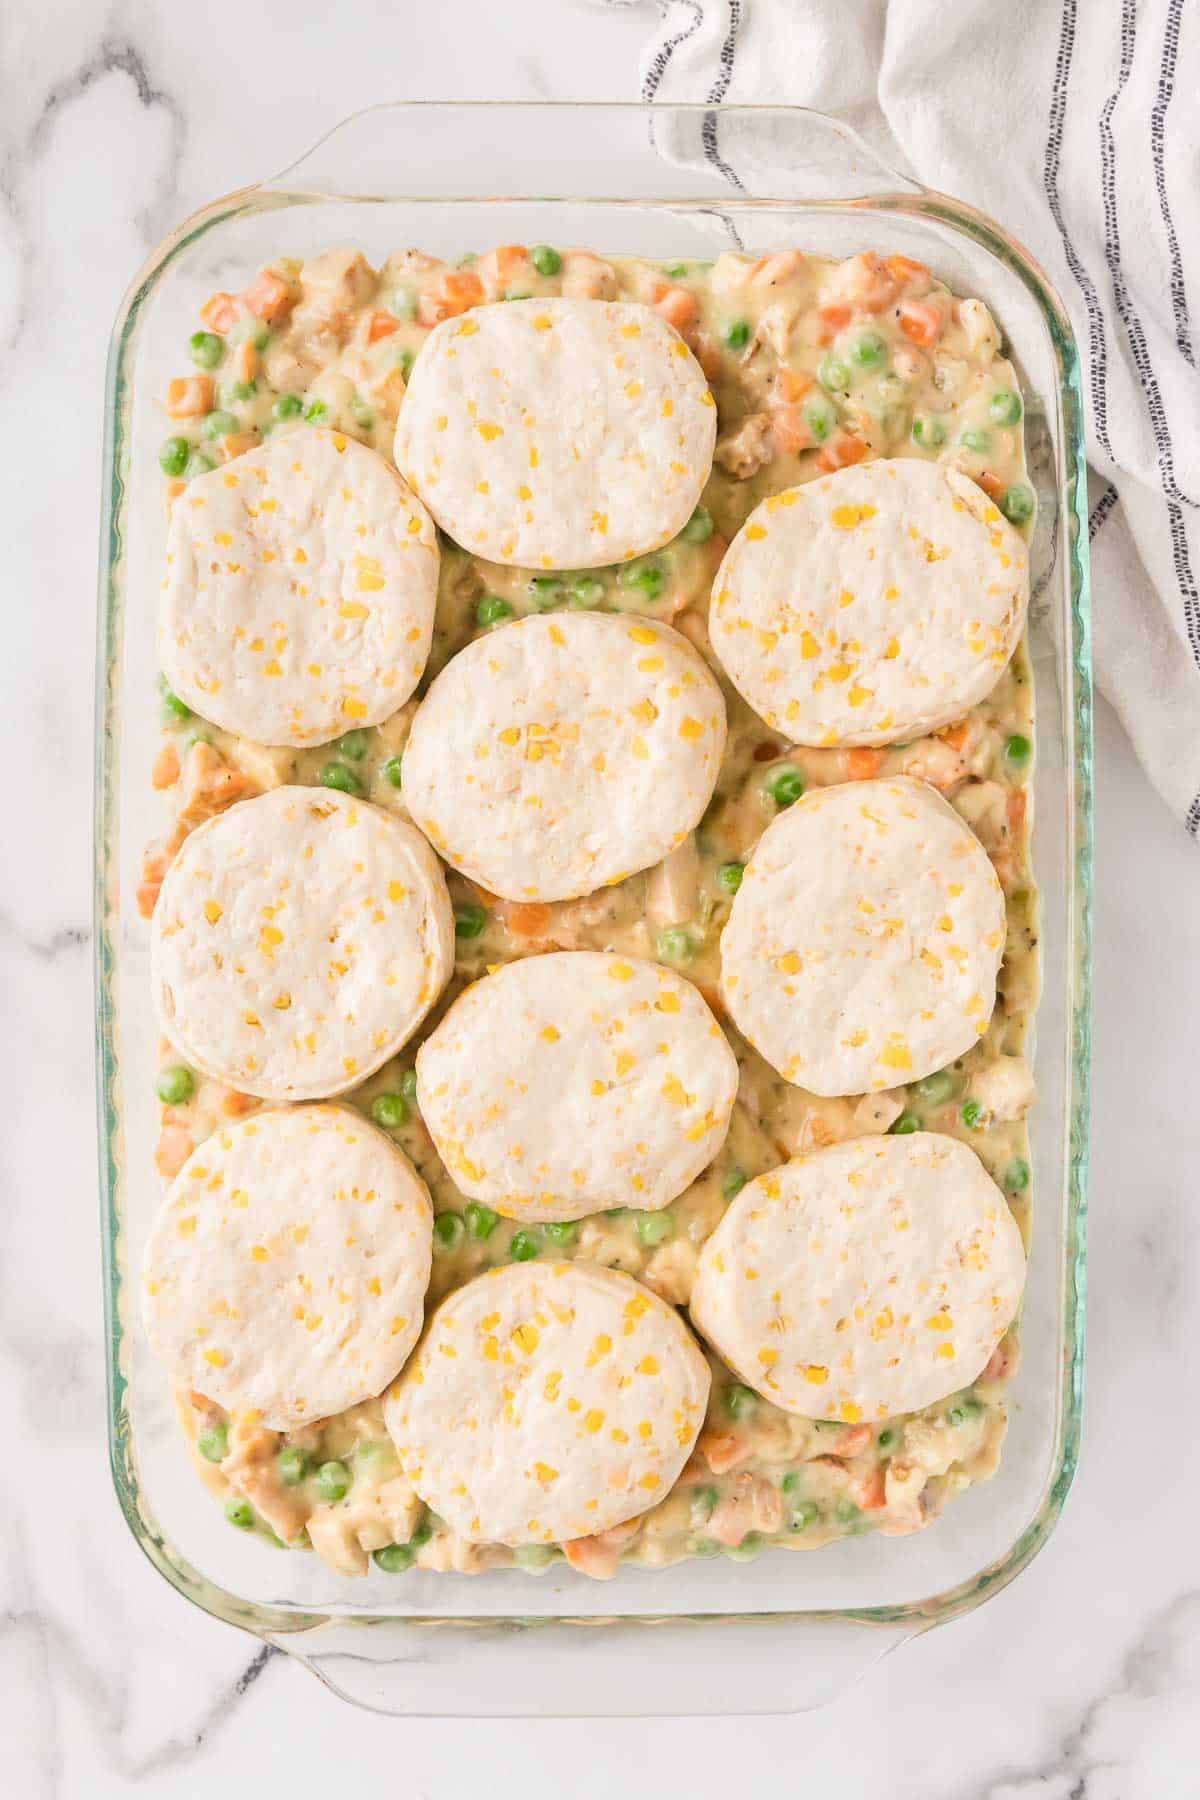 Refrigerated biscuits are evenly layered over the pot pie filling